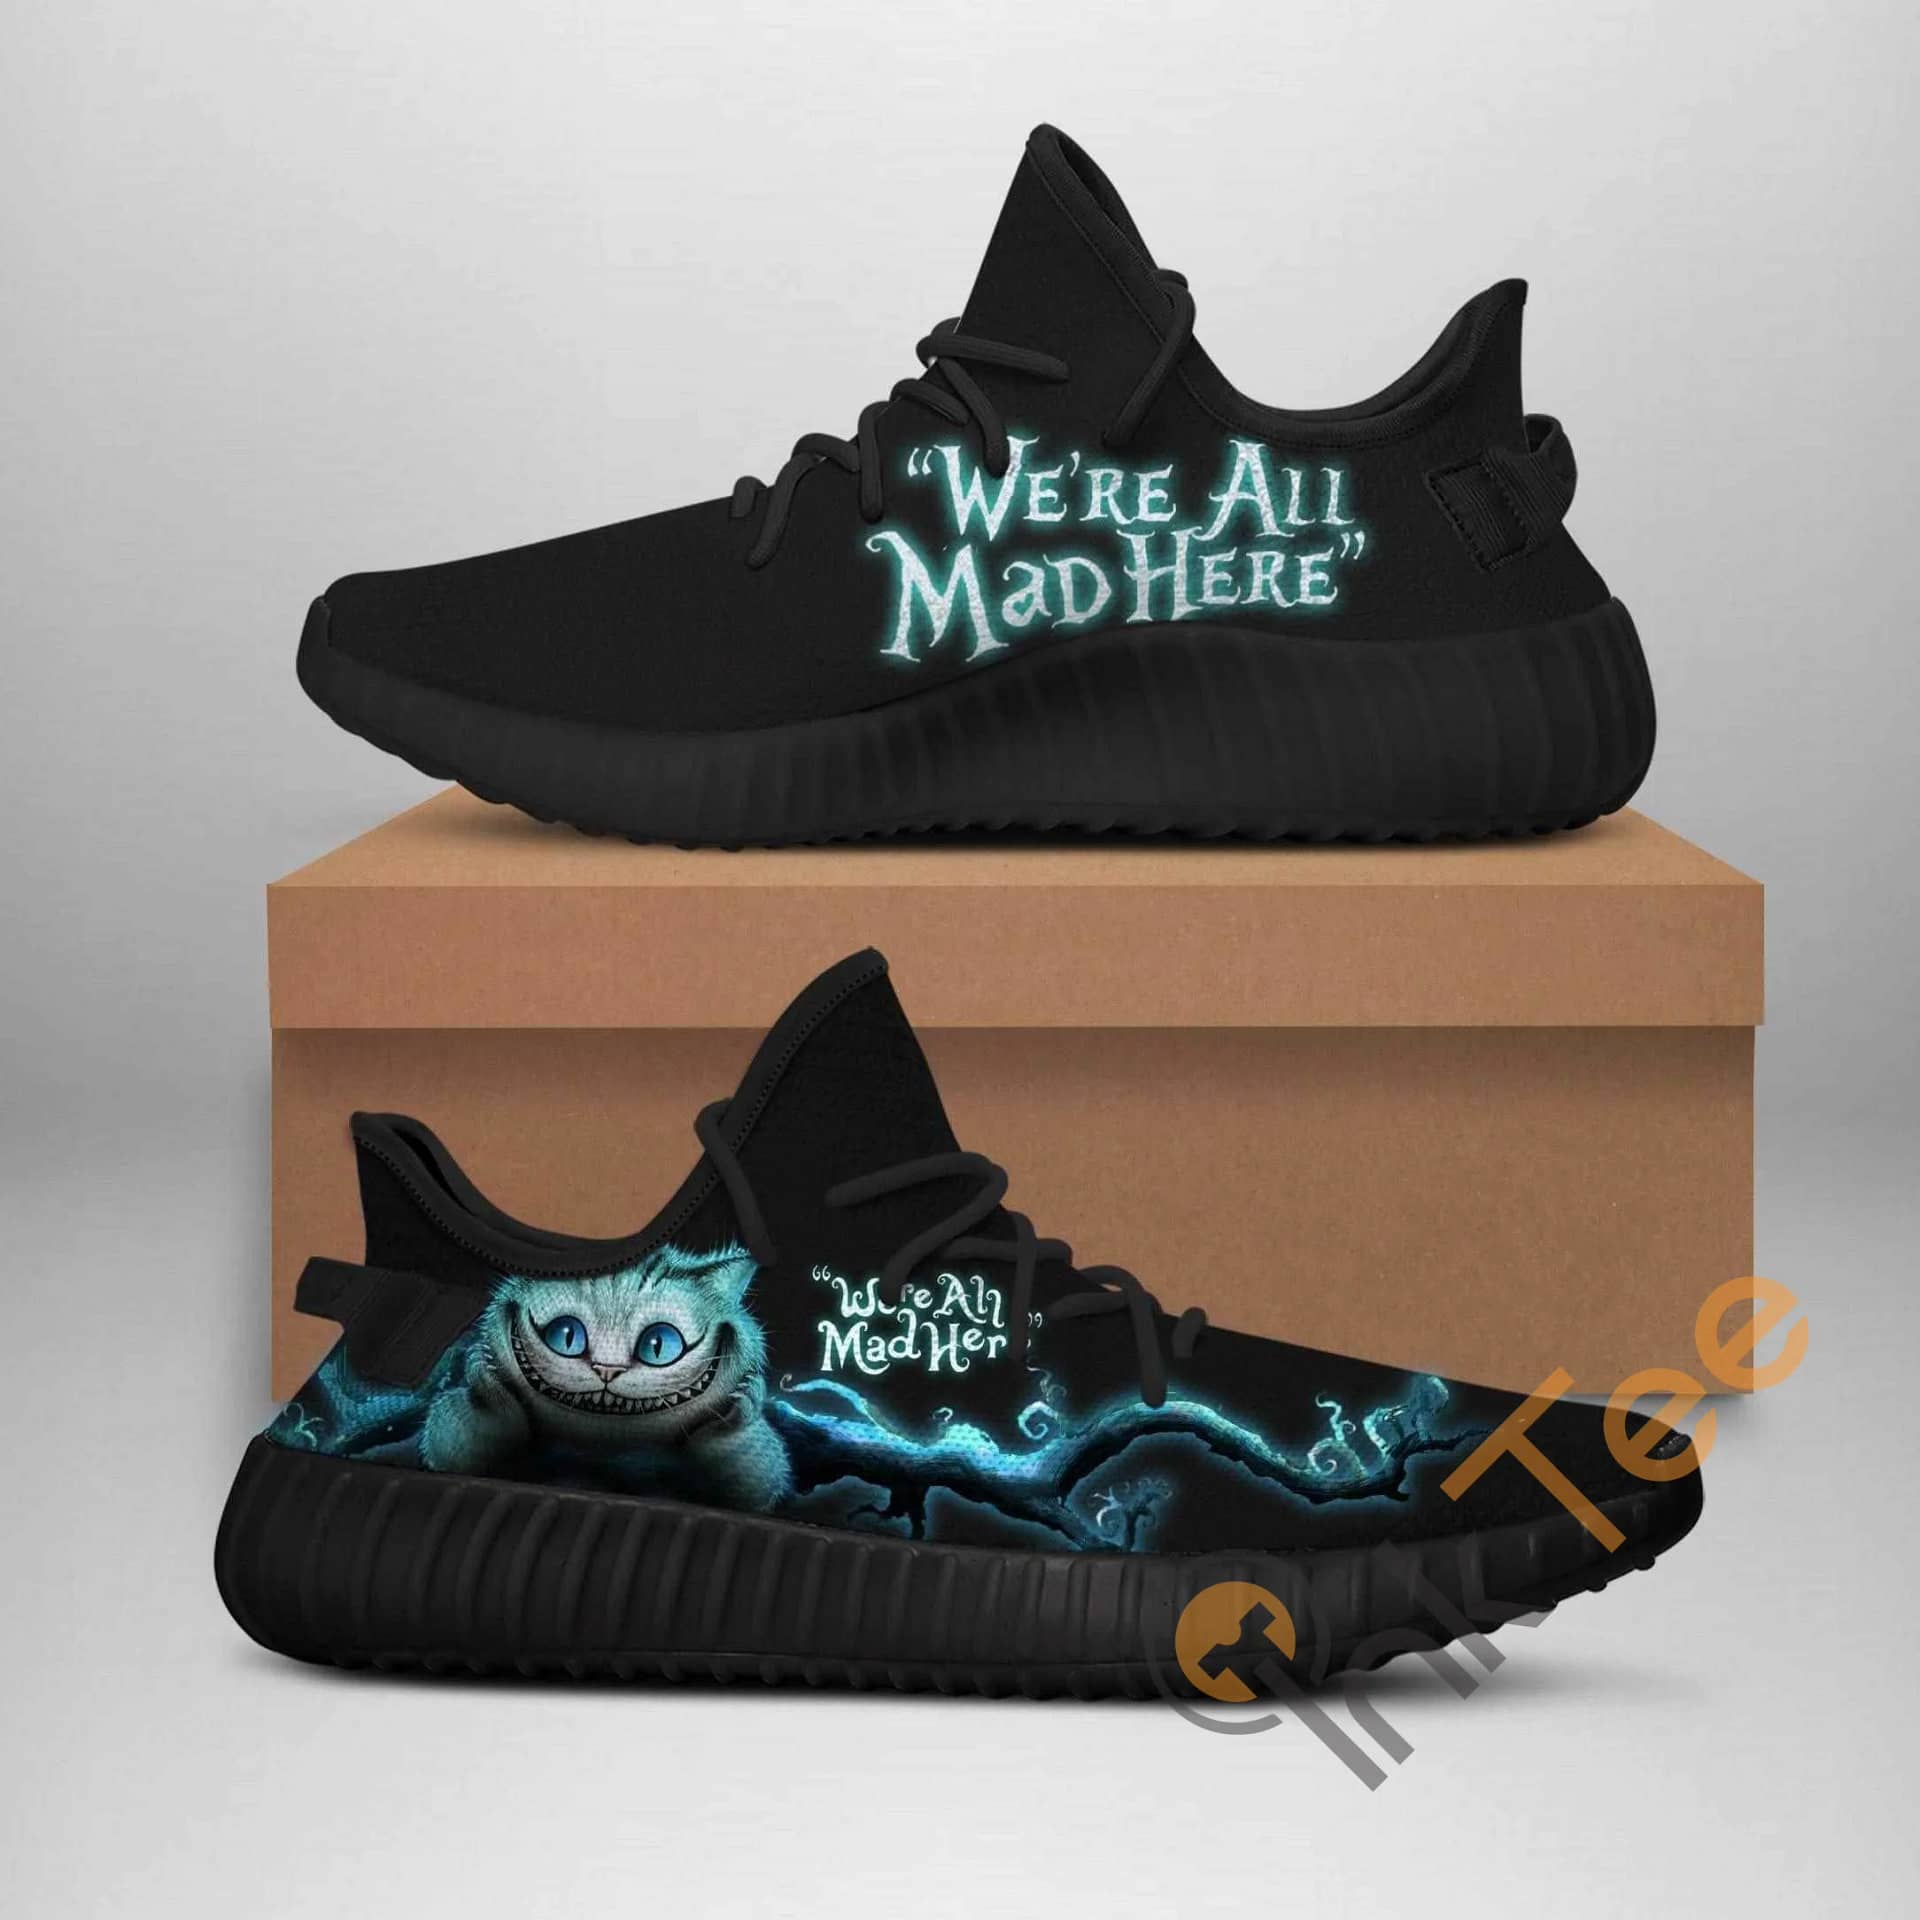 Cheshire Cat Character Alice In Wonderland Amazon Best Selling Yeezy Boost